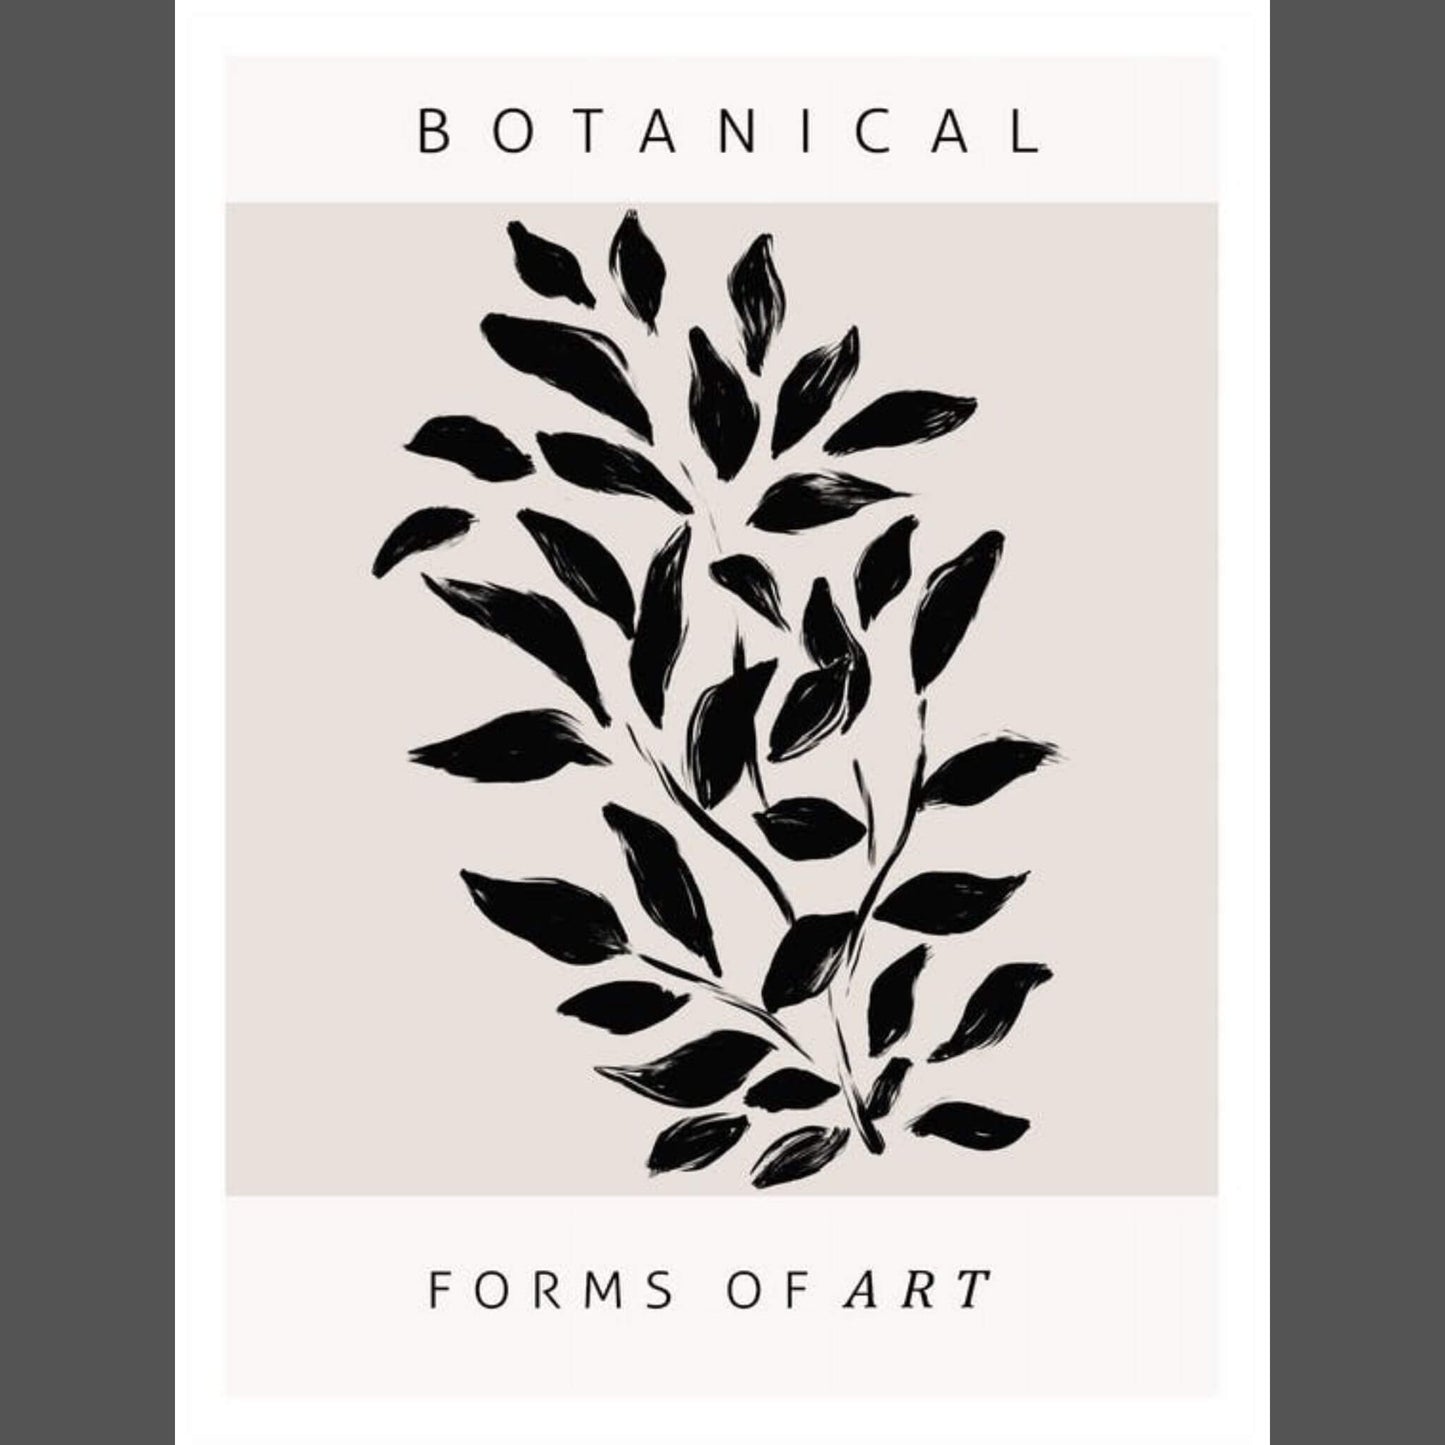 No.03 Poster Botanical forms of Art 30x40 - Unik by Nature